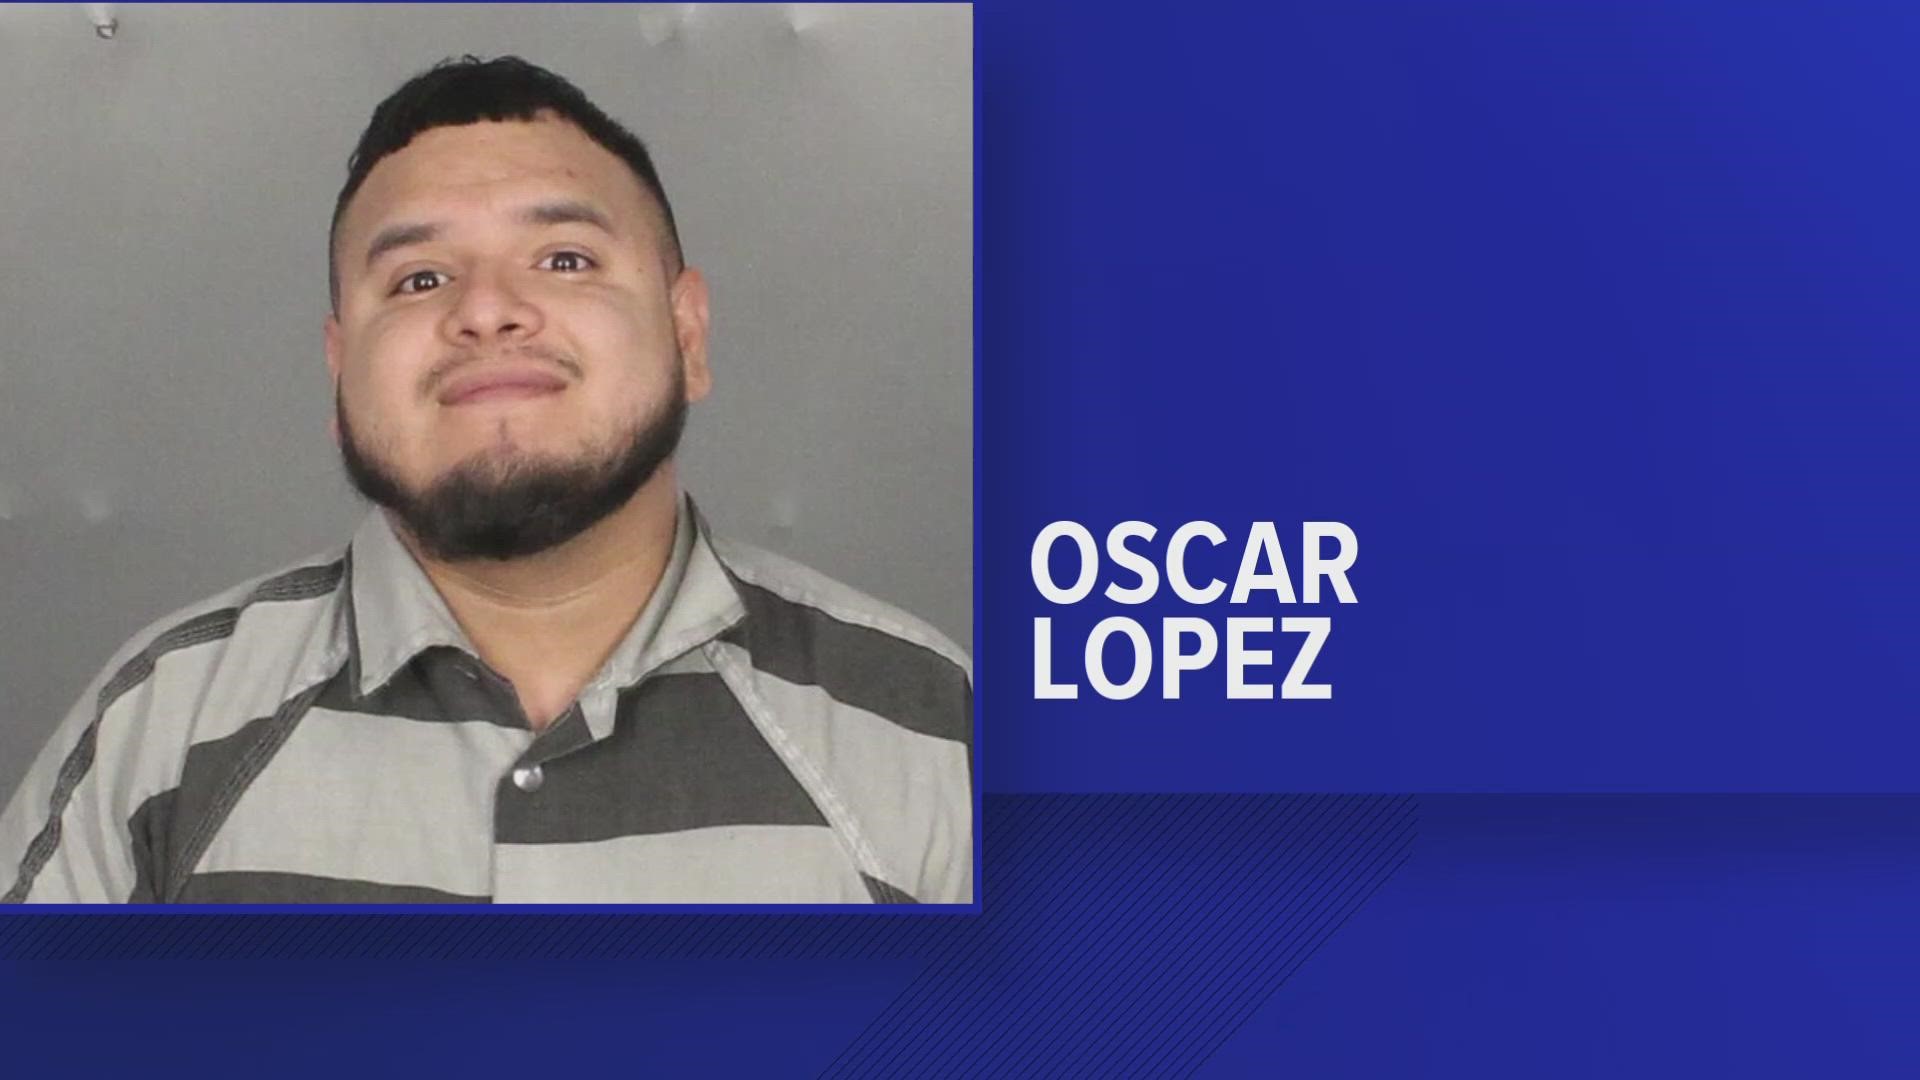 Oscar Thomas Lopez was already in custody for a different crime when the warrant was served.